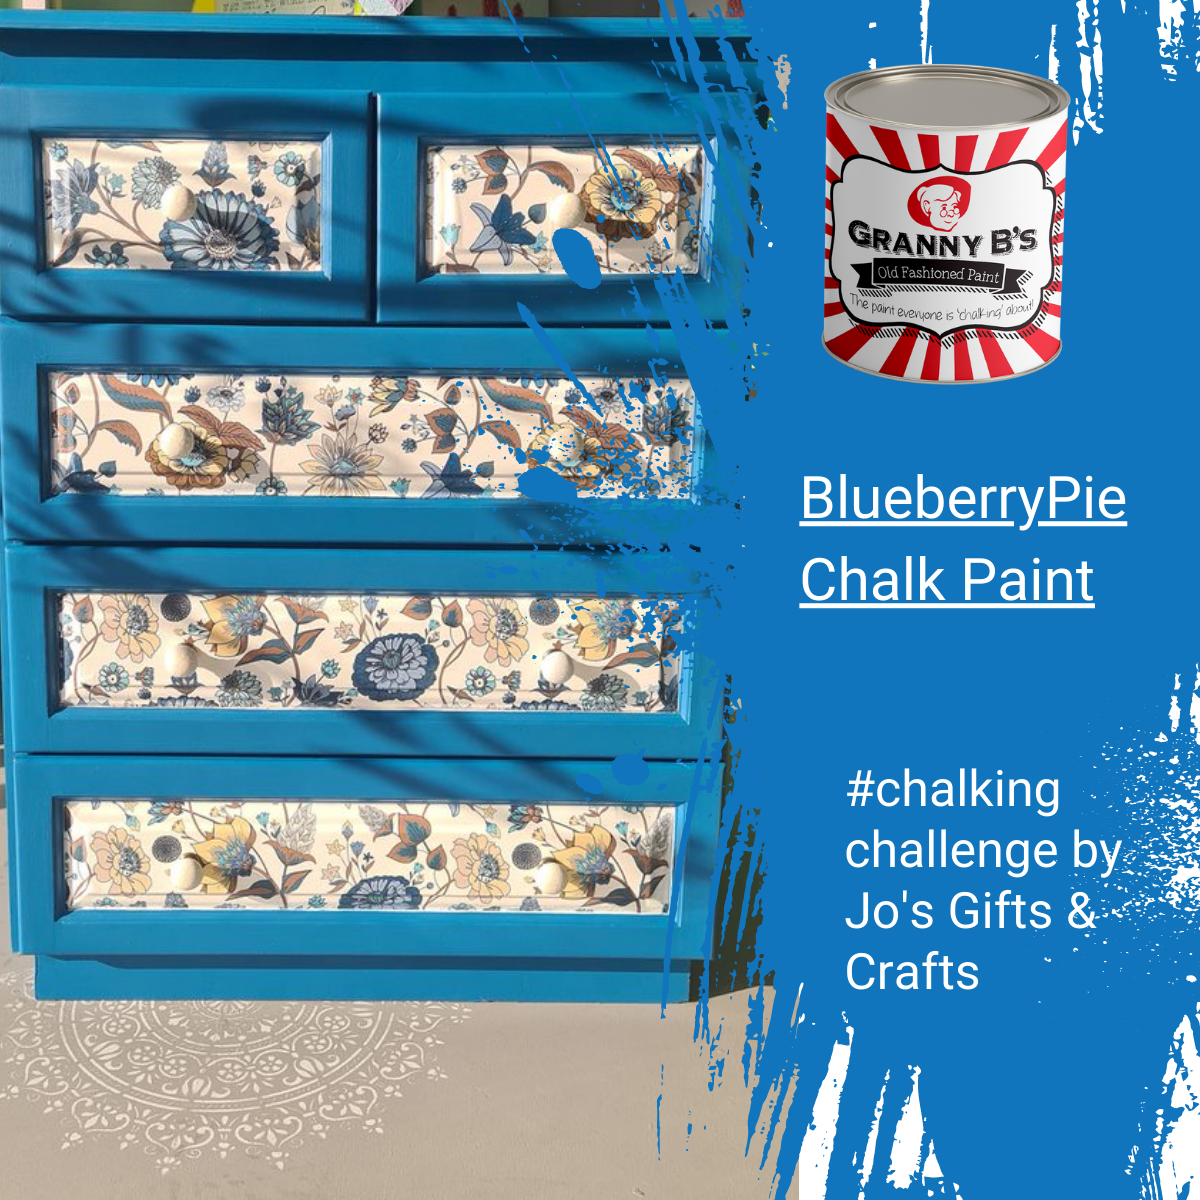 Chalkpaint - Blueberry Pie (Bright Blue)